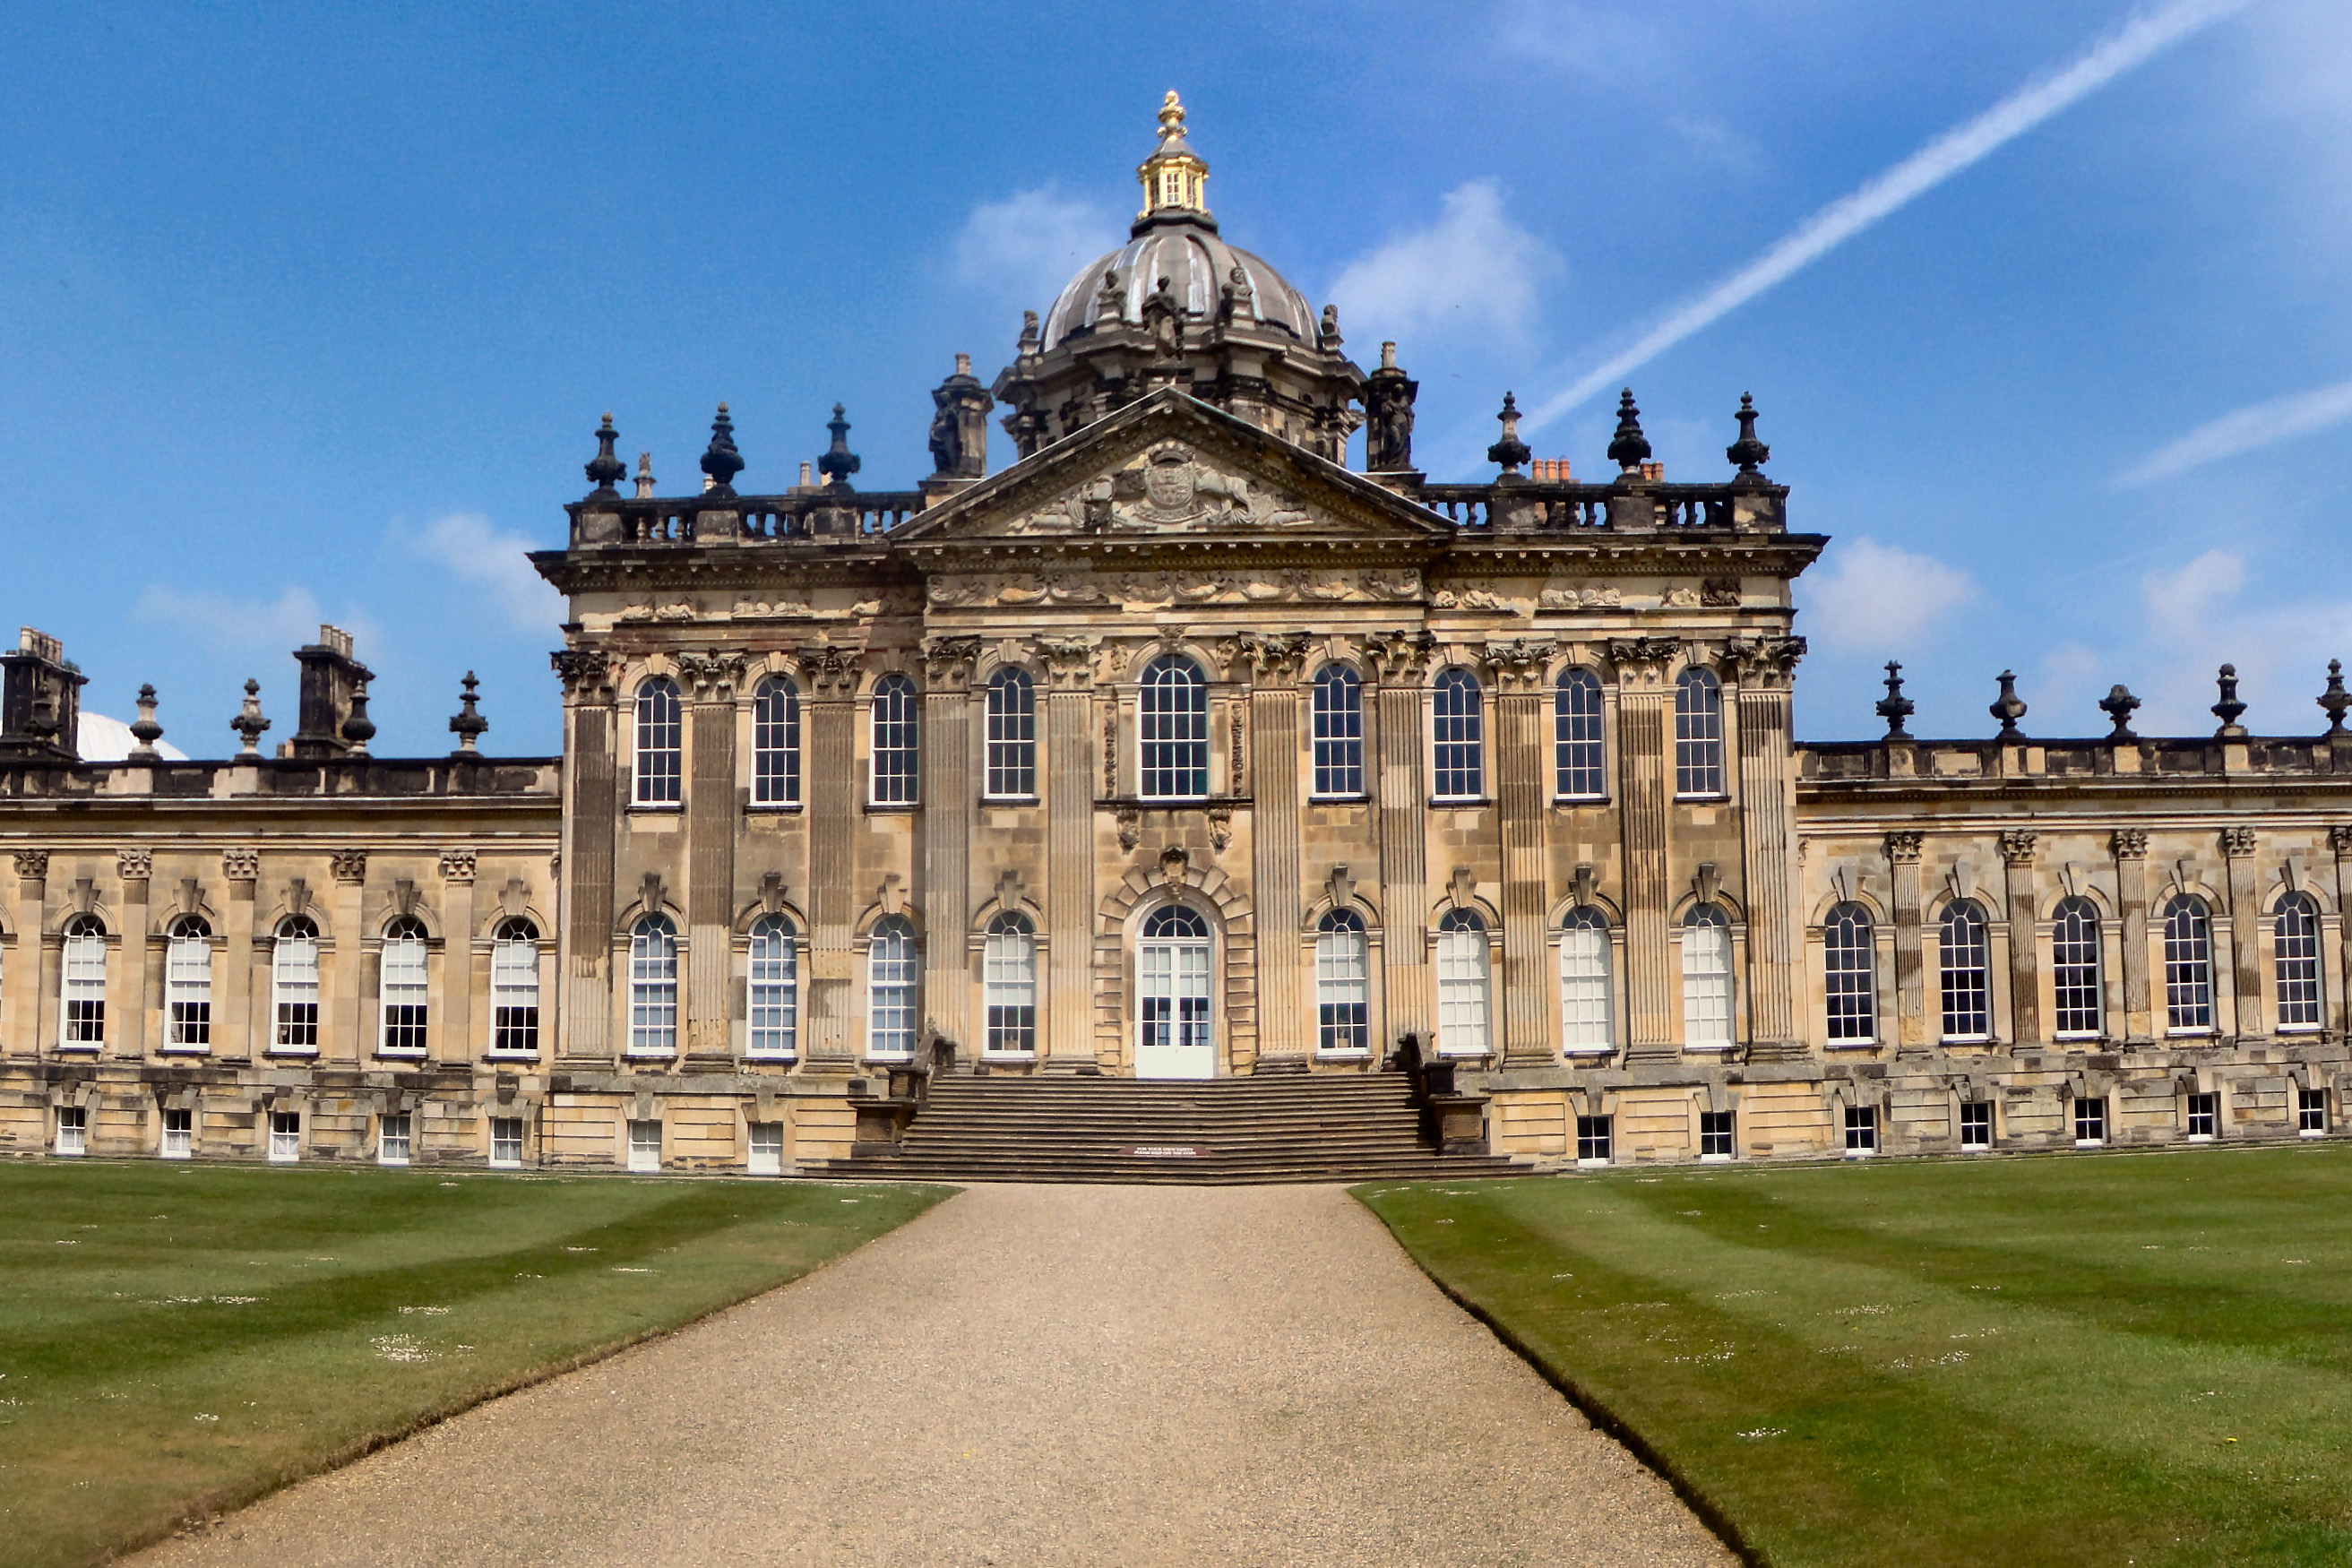 Brideshead Revisited filming location: Castle Howard, Yorkshire